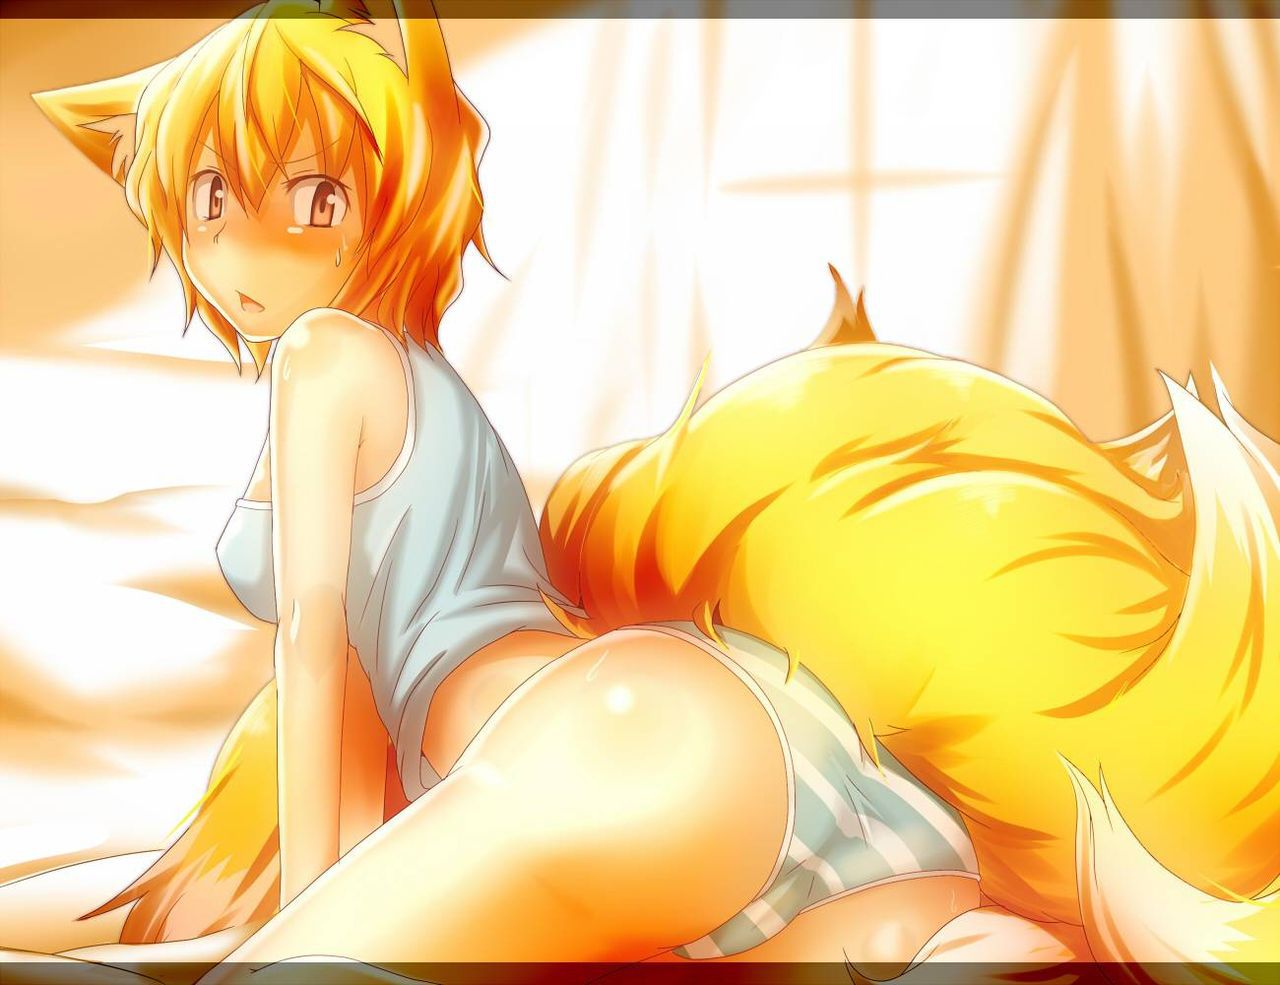 I want to pull it out with an erotic image of a fox girl, so I'll paste it 14